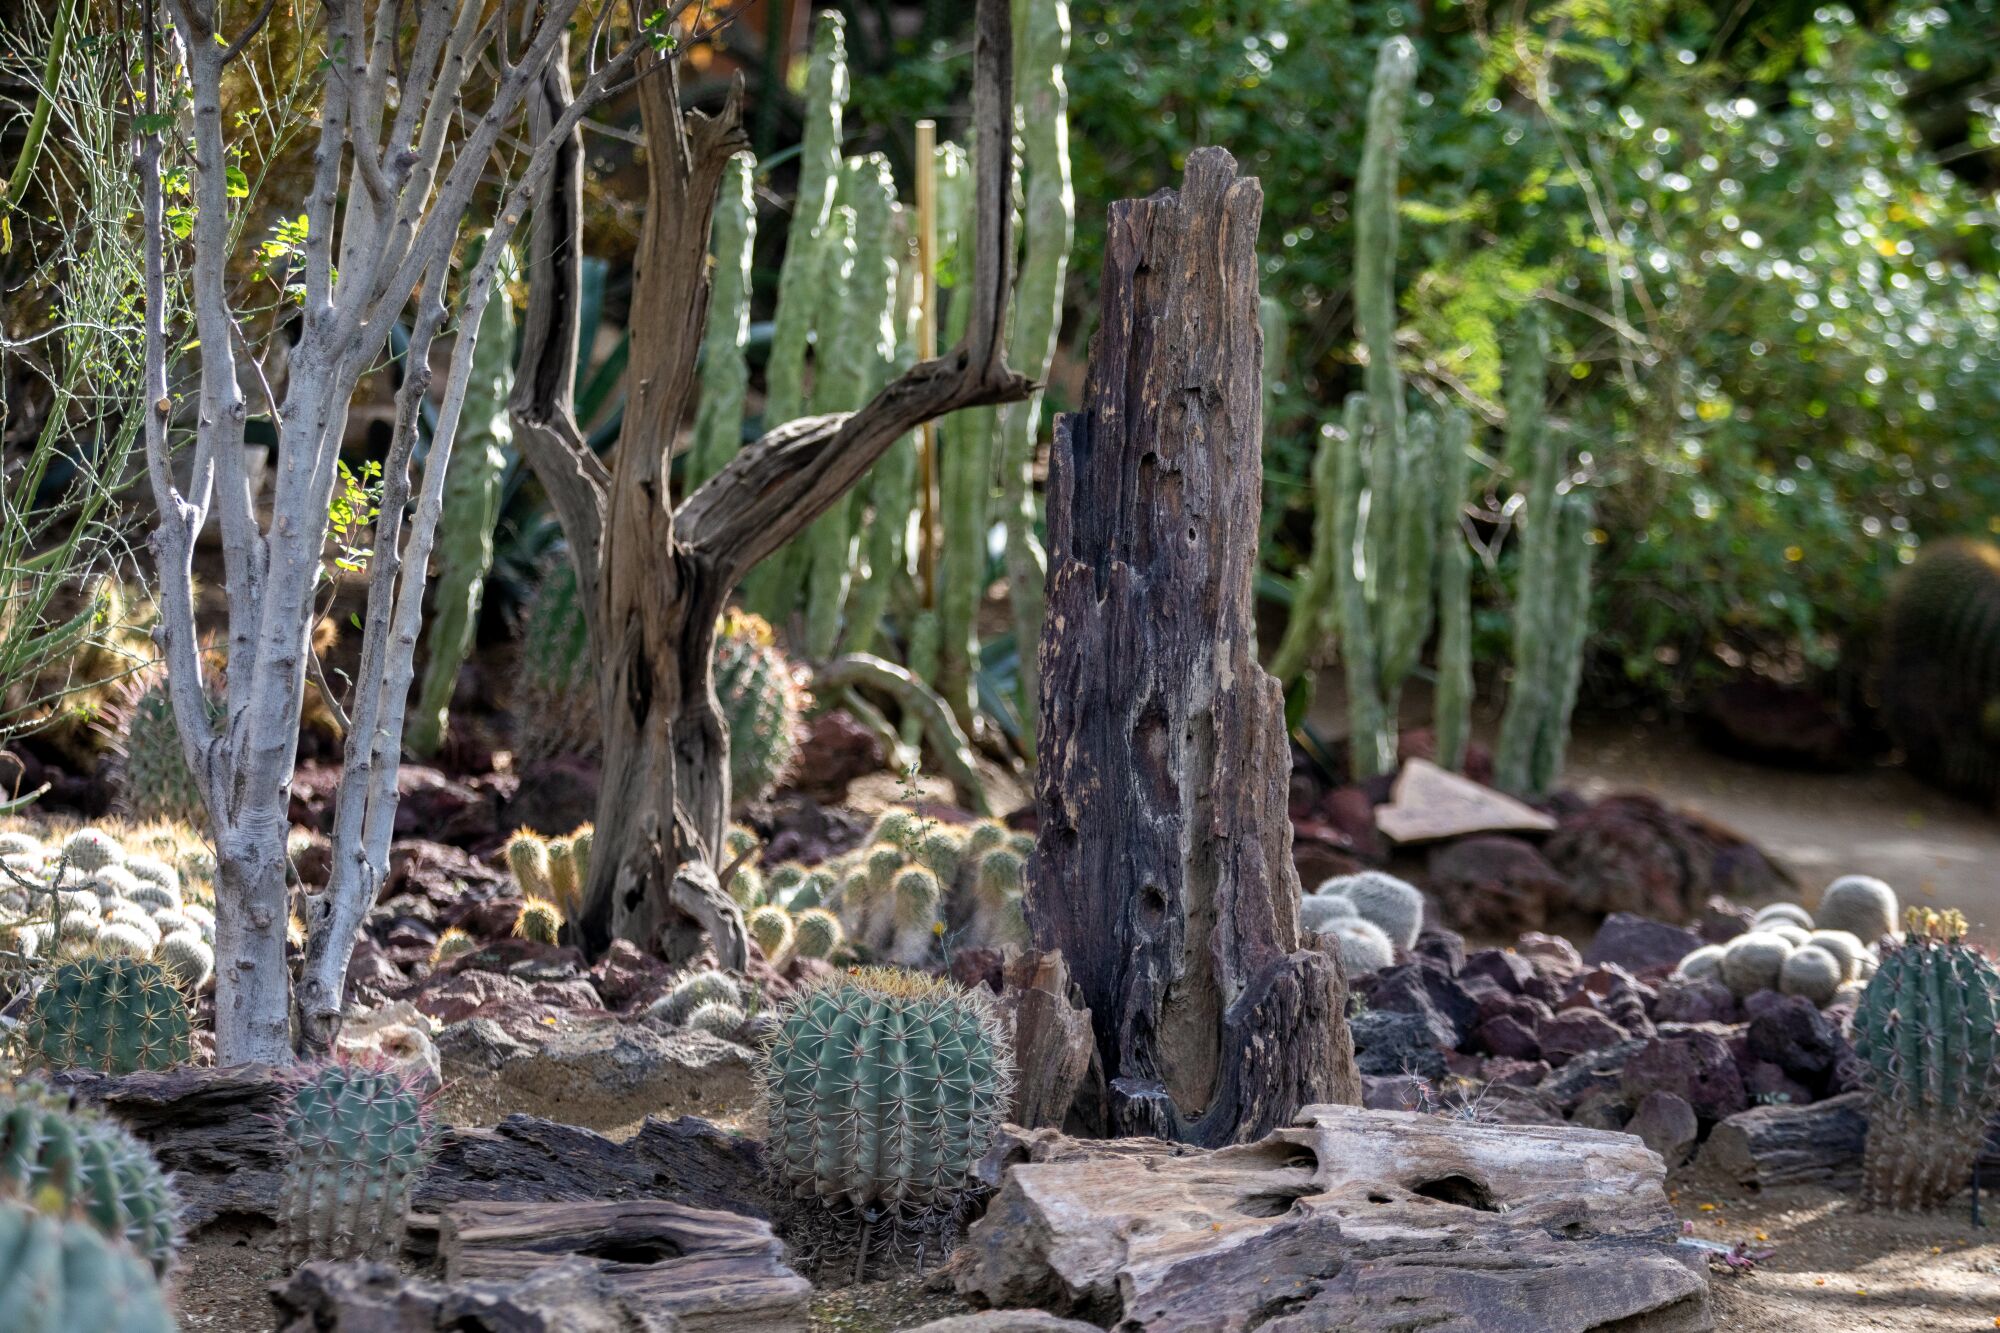 A shady spot at Moorten Botanical Garden rife with succulents of all kinds.